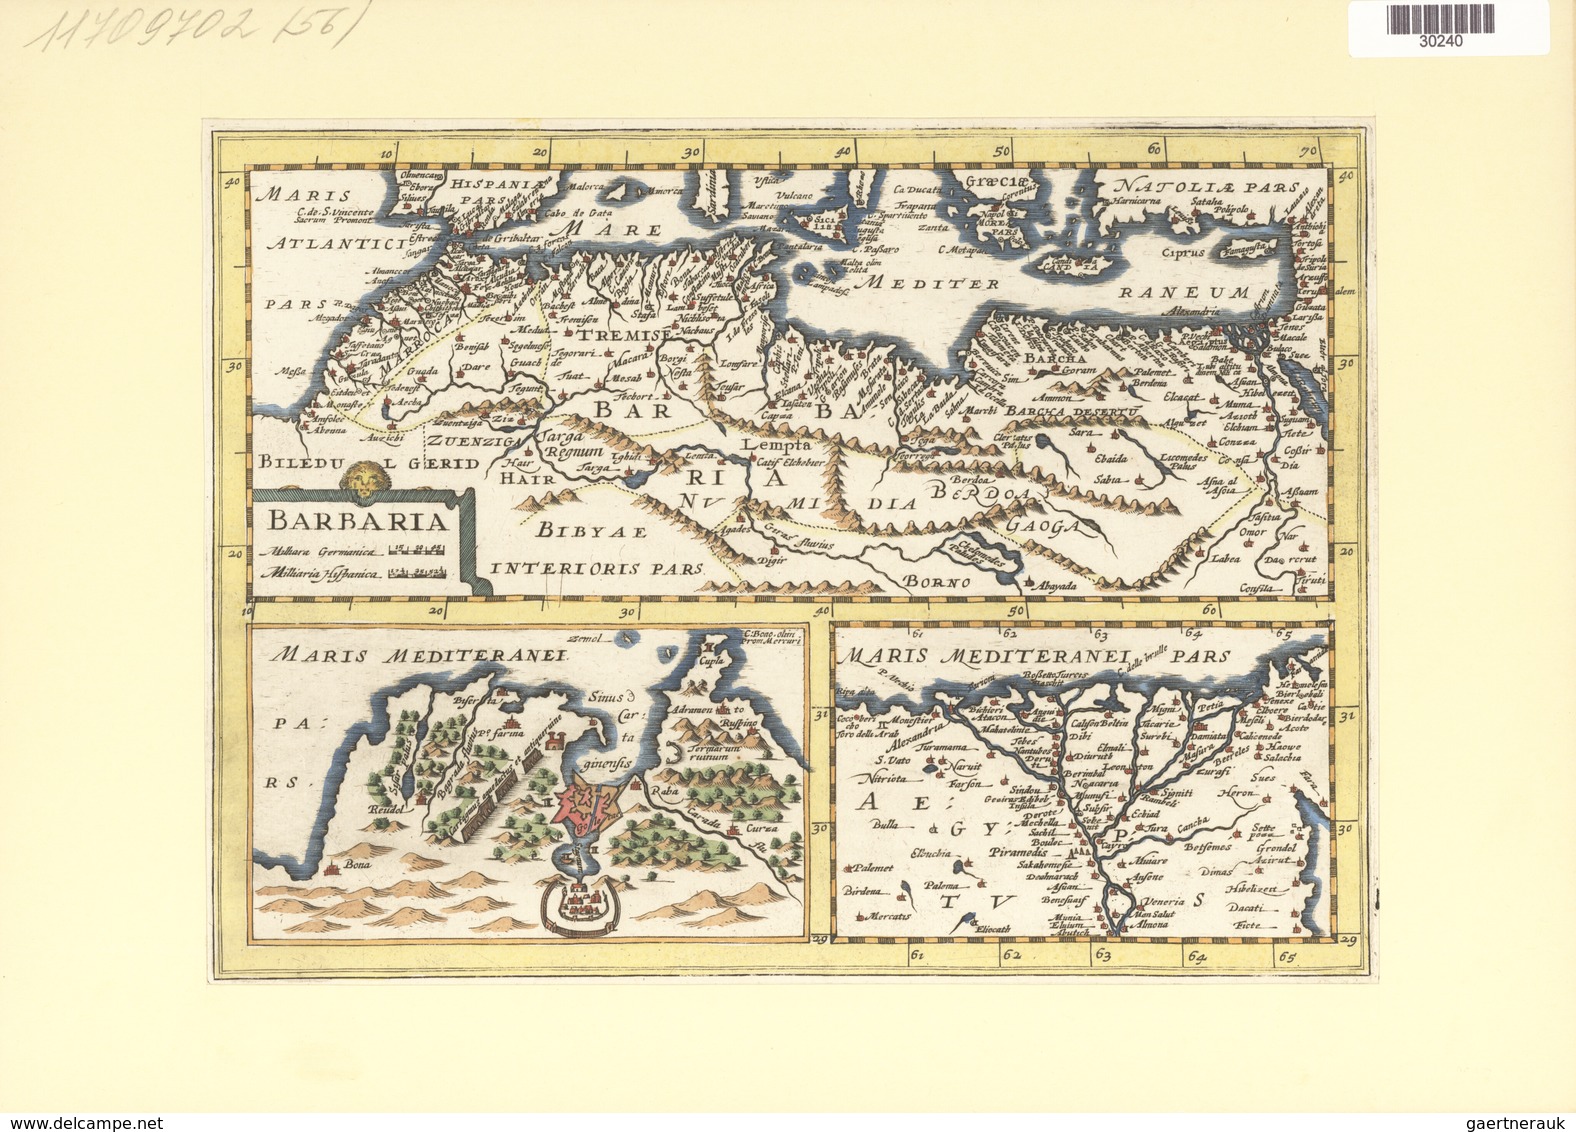 Landkarten Und Stiche: 1734. Barbary, As Published In The Mercator Atlas Minor 1734 Edition. Nice Th - Geographie